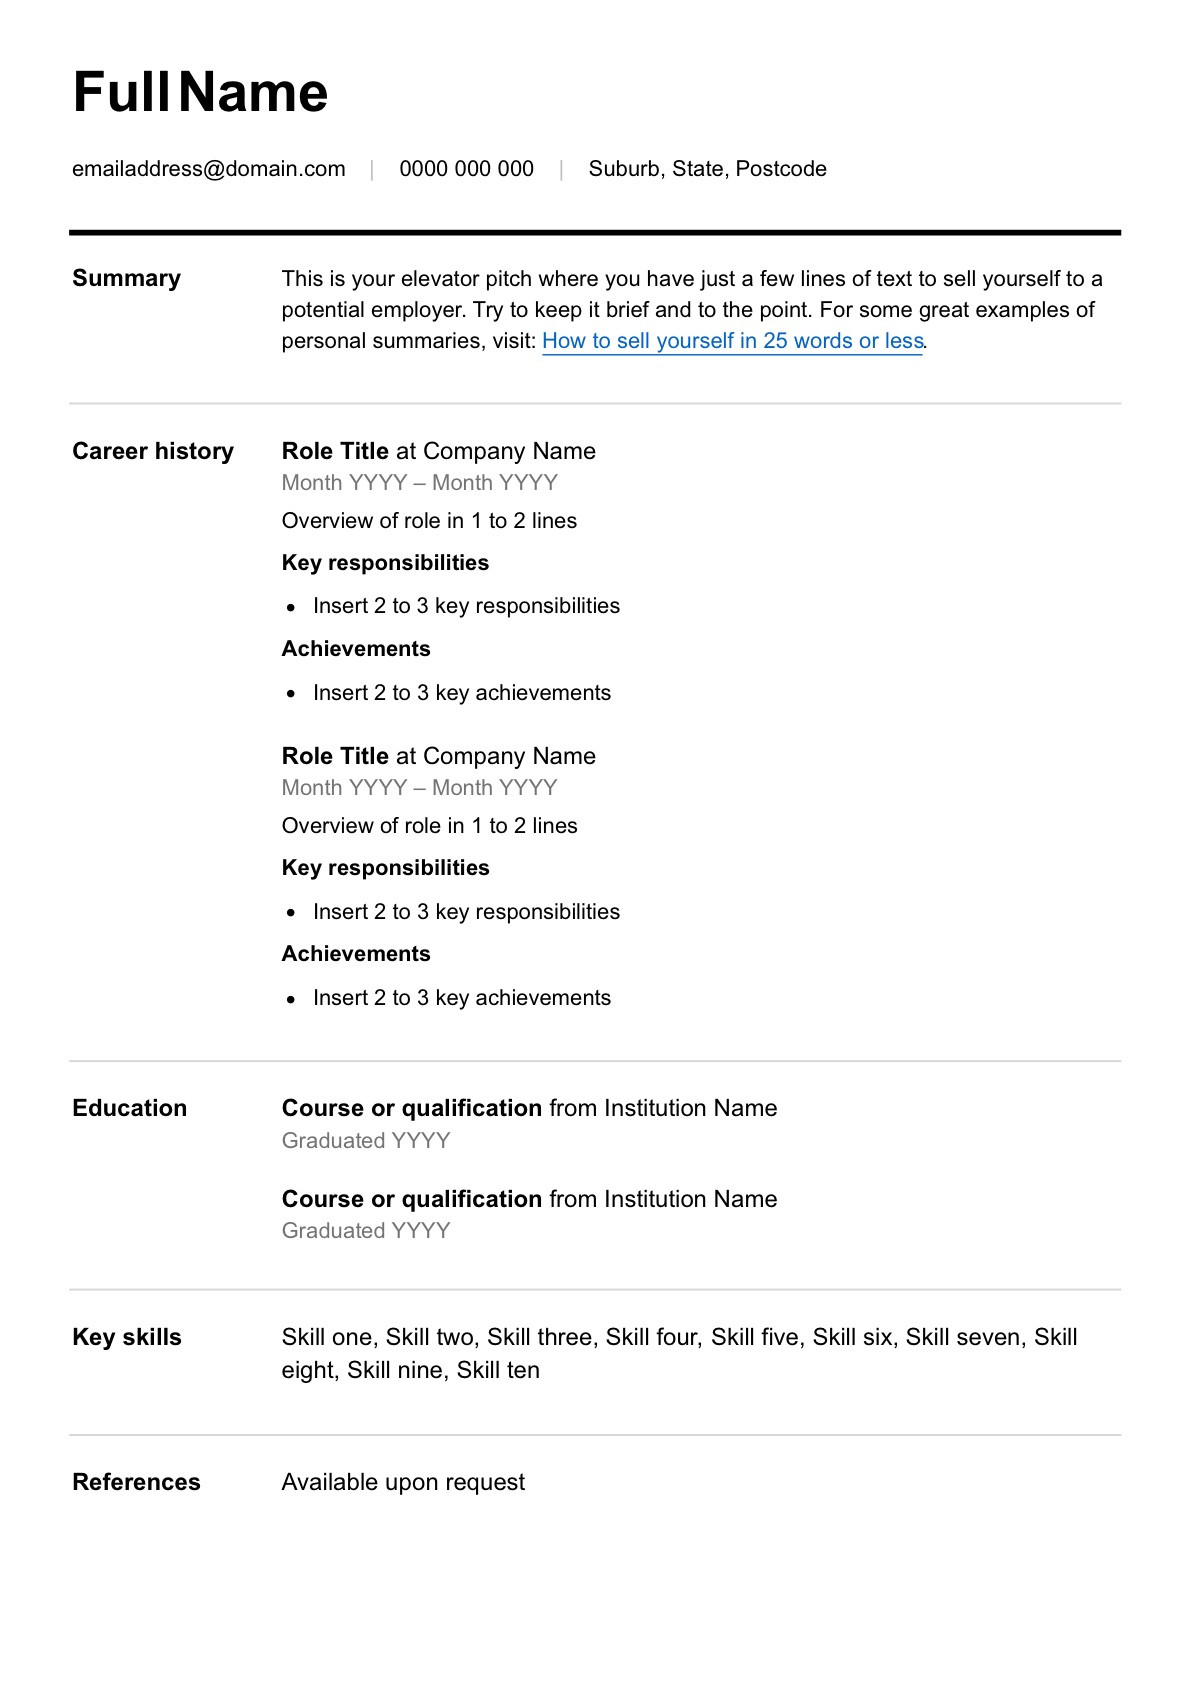 First Time Resume with No Experience Samples Australia Free ResumÃ© Template – Seek Career Advice